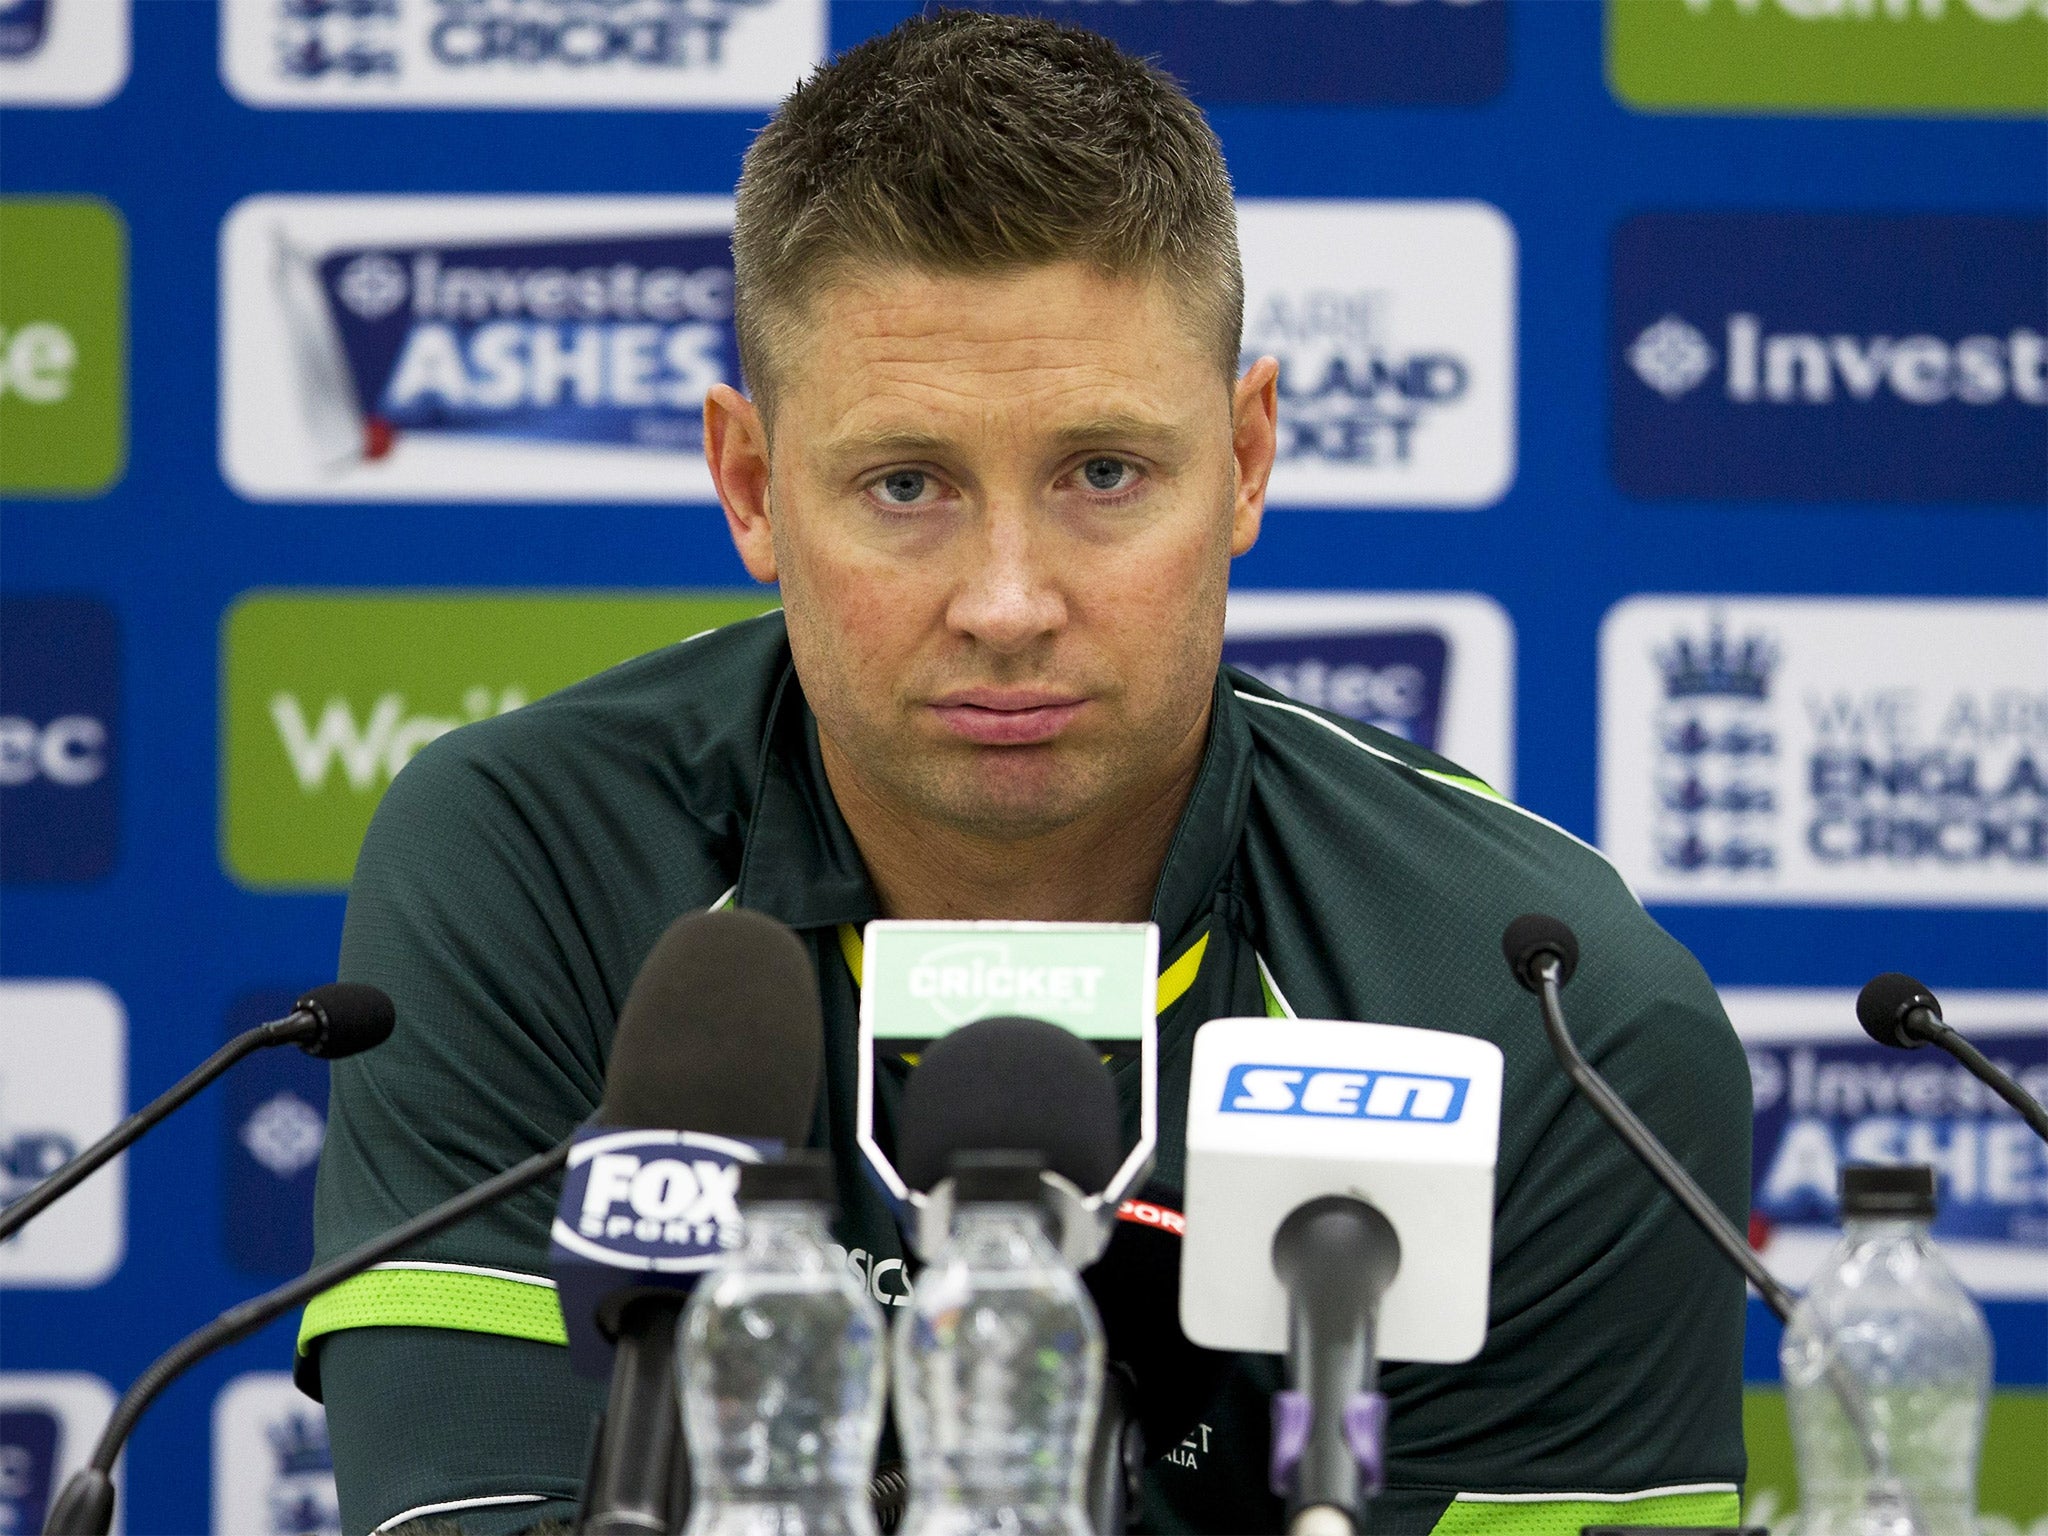 Australia captain Michael Clarke talking to the media at the Oval on Wednesday